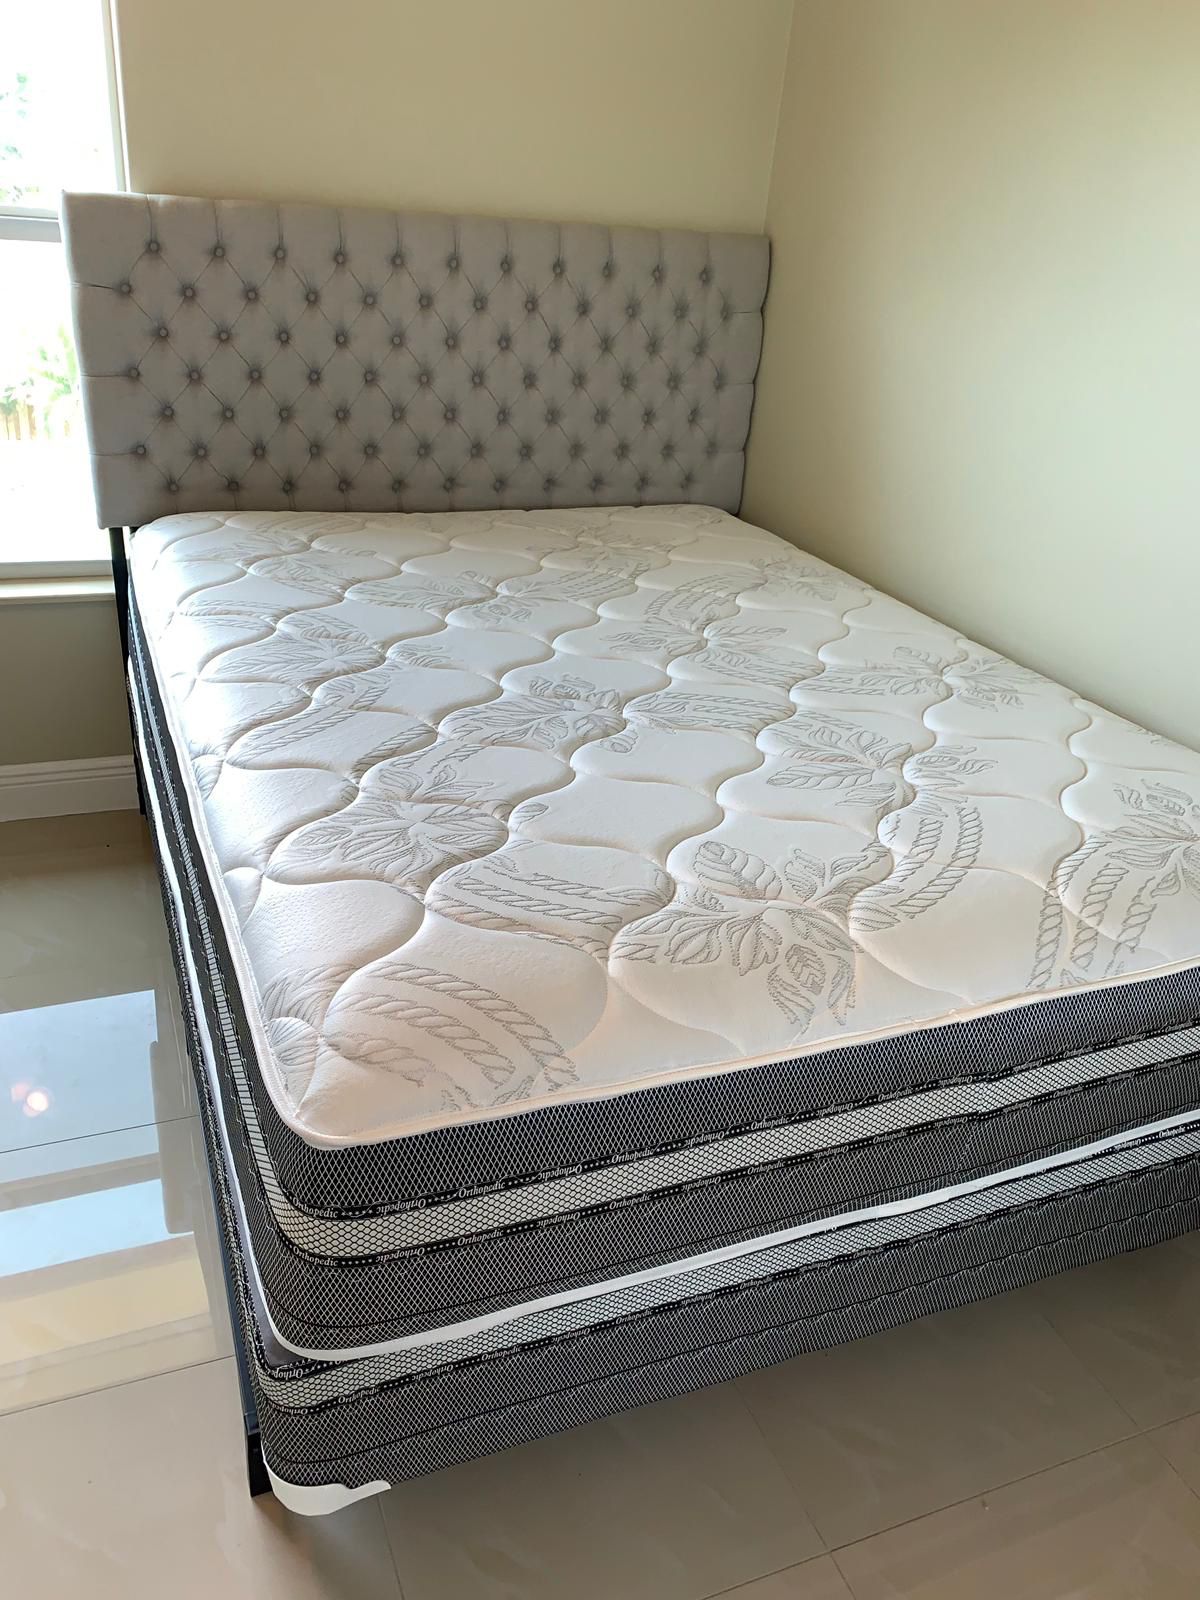 Queen memory foam mattresses and box springs FREE DELIVERY 220$ bed frame not included